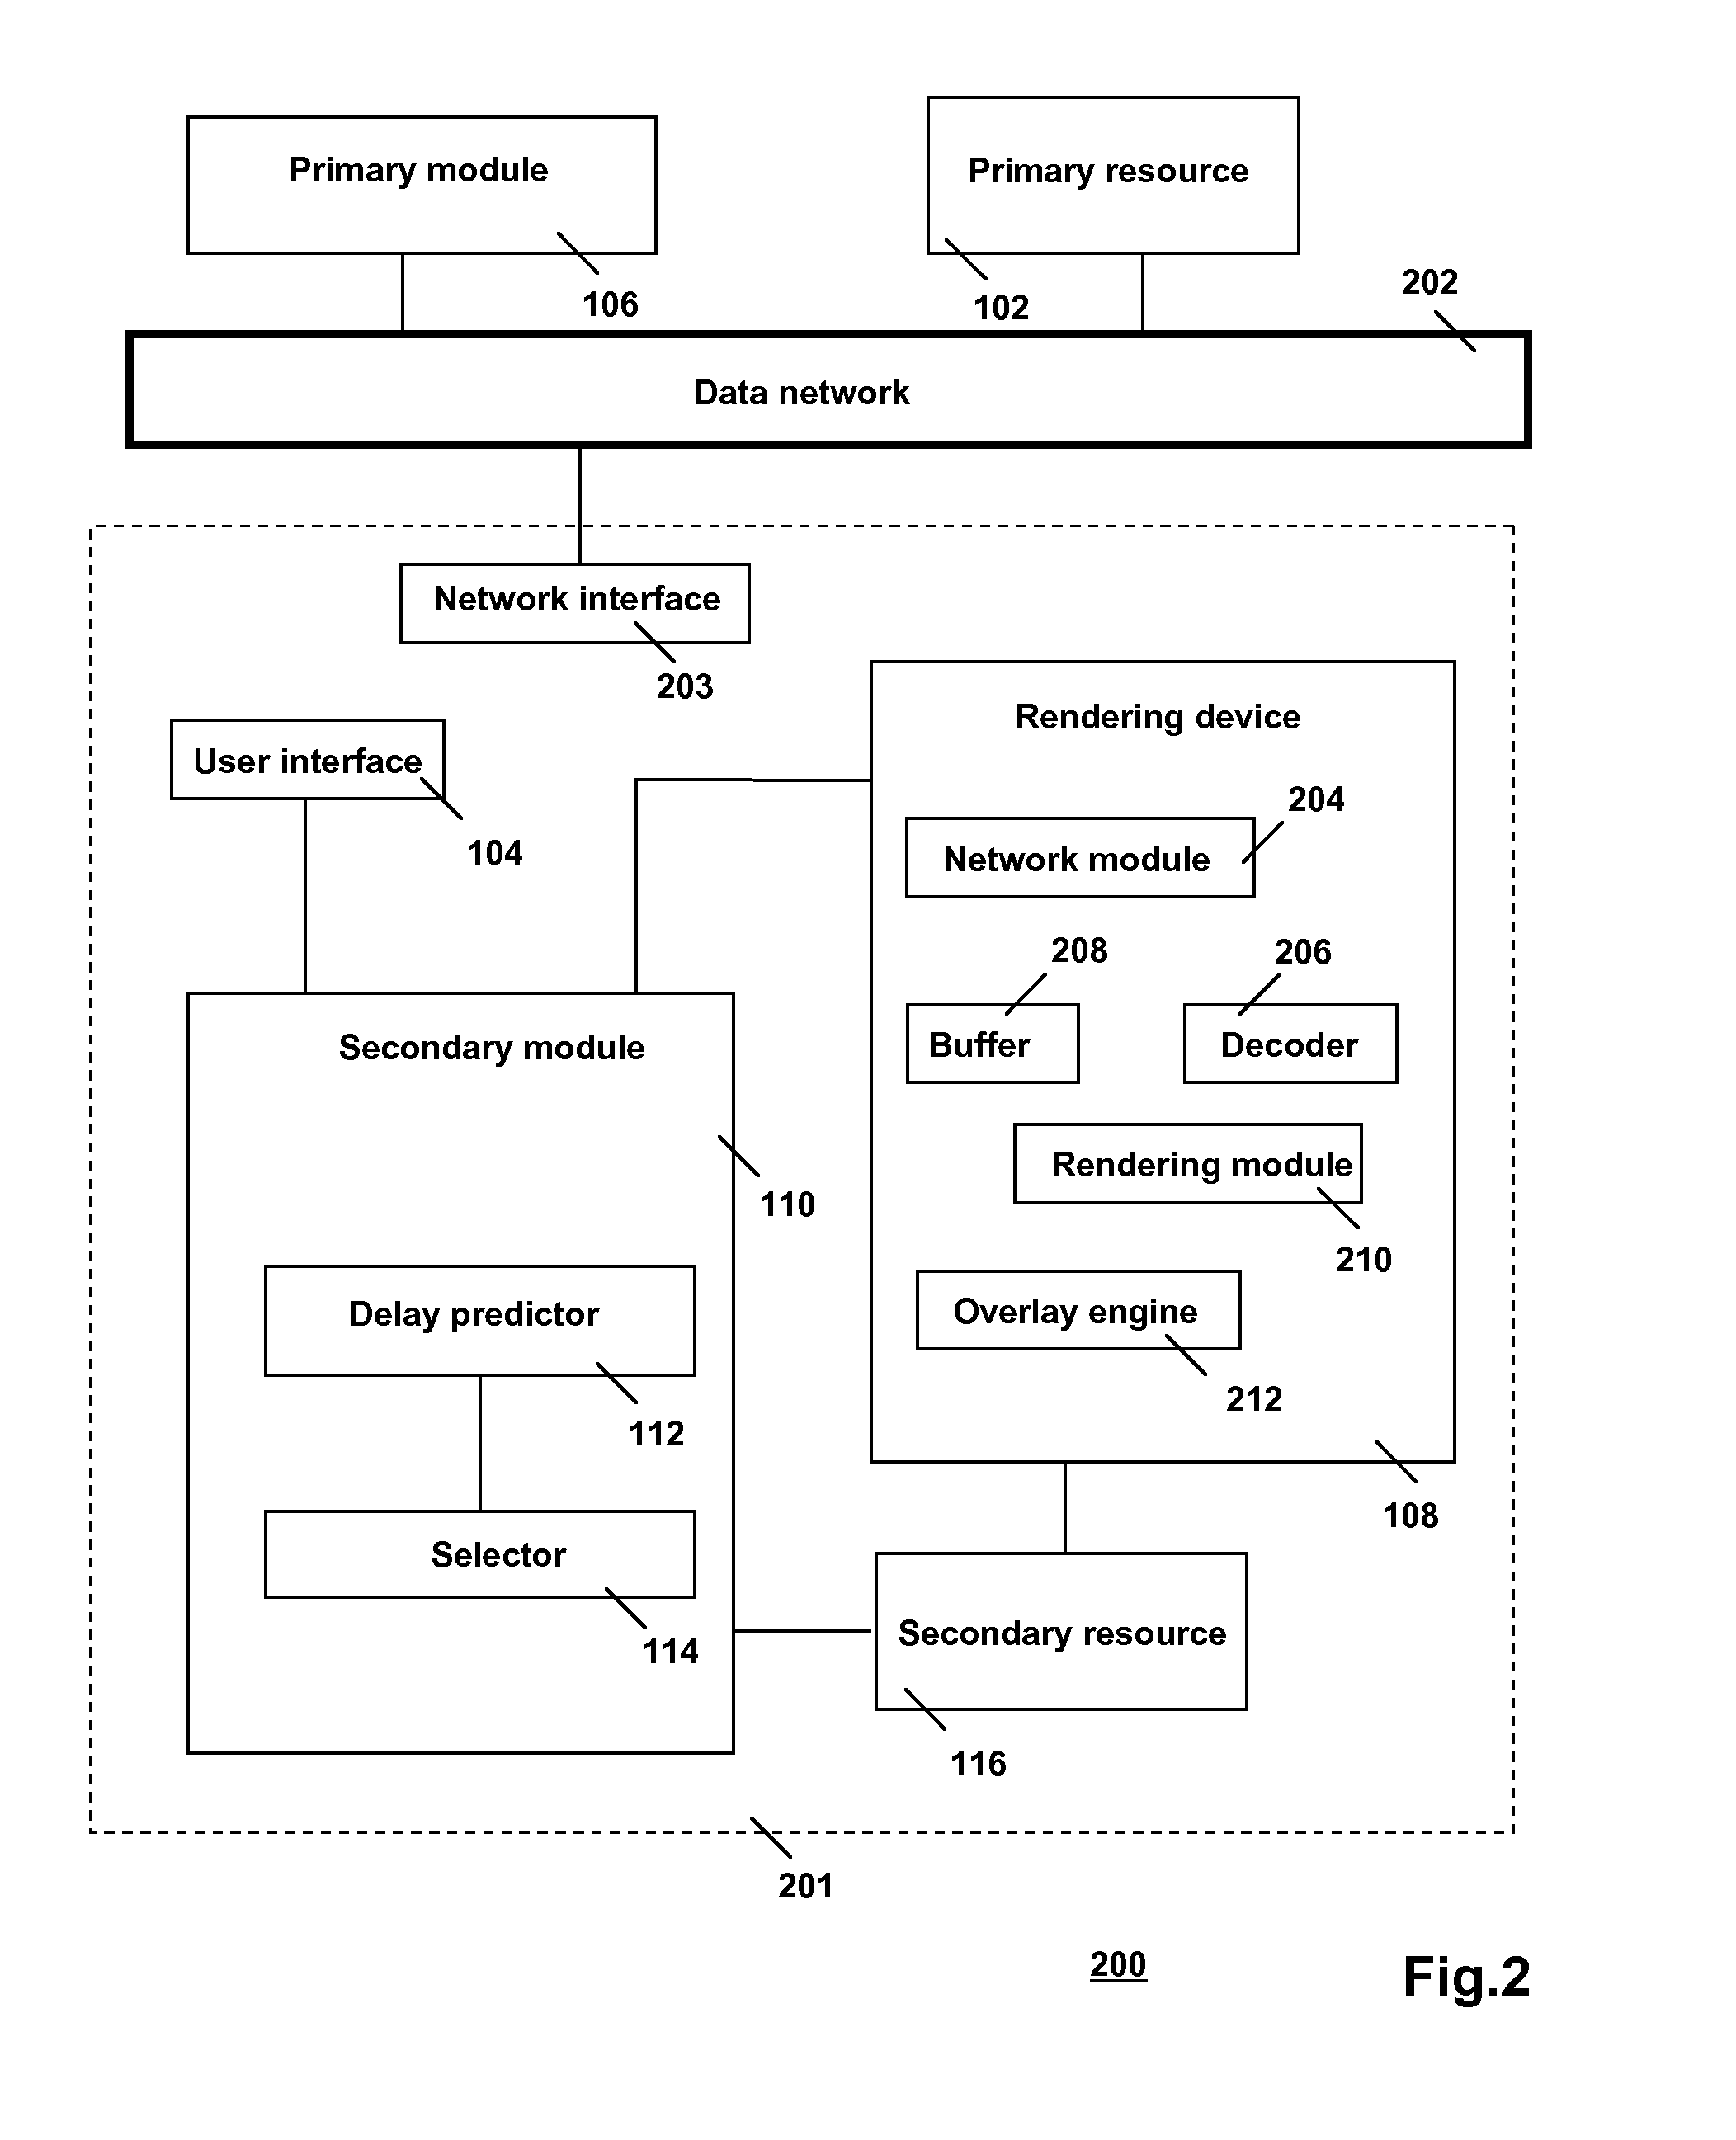 Playing out interludes based on predicted duration of channel-switching delay or of invoked pause